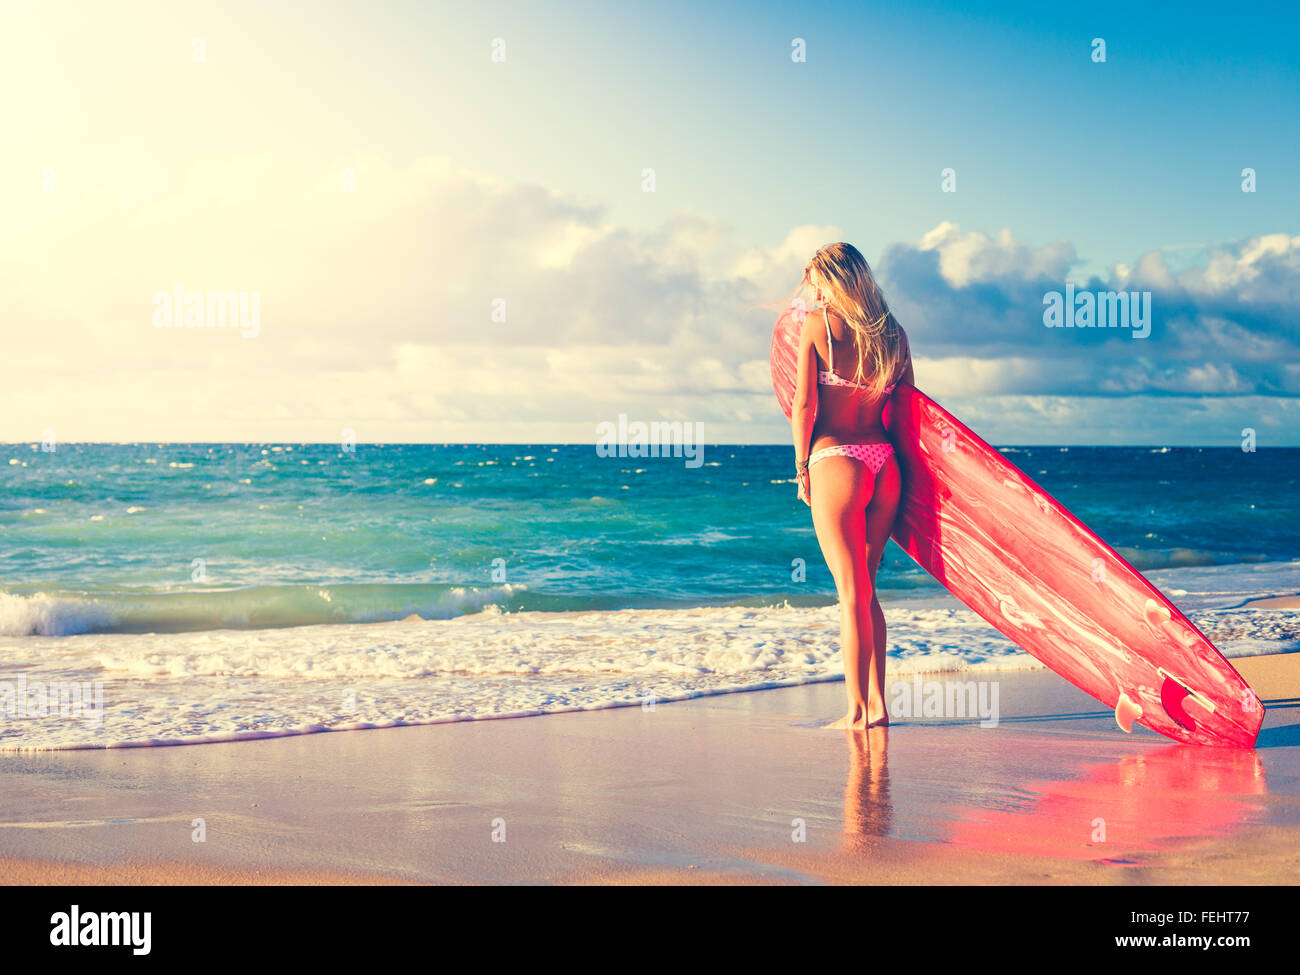 Beautiful Blonde Surfer Girl on the Beach at Sunset. Summer Lifestyle. Stock Photo